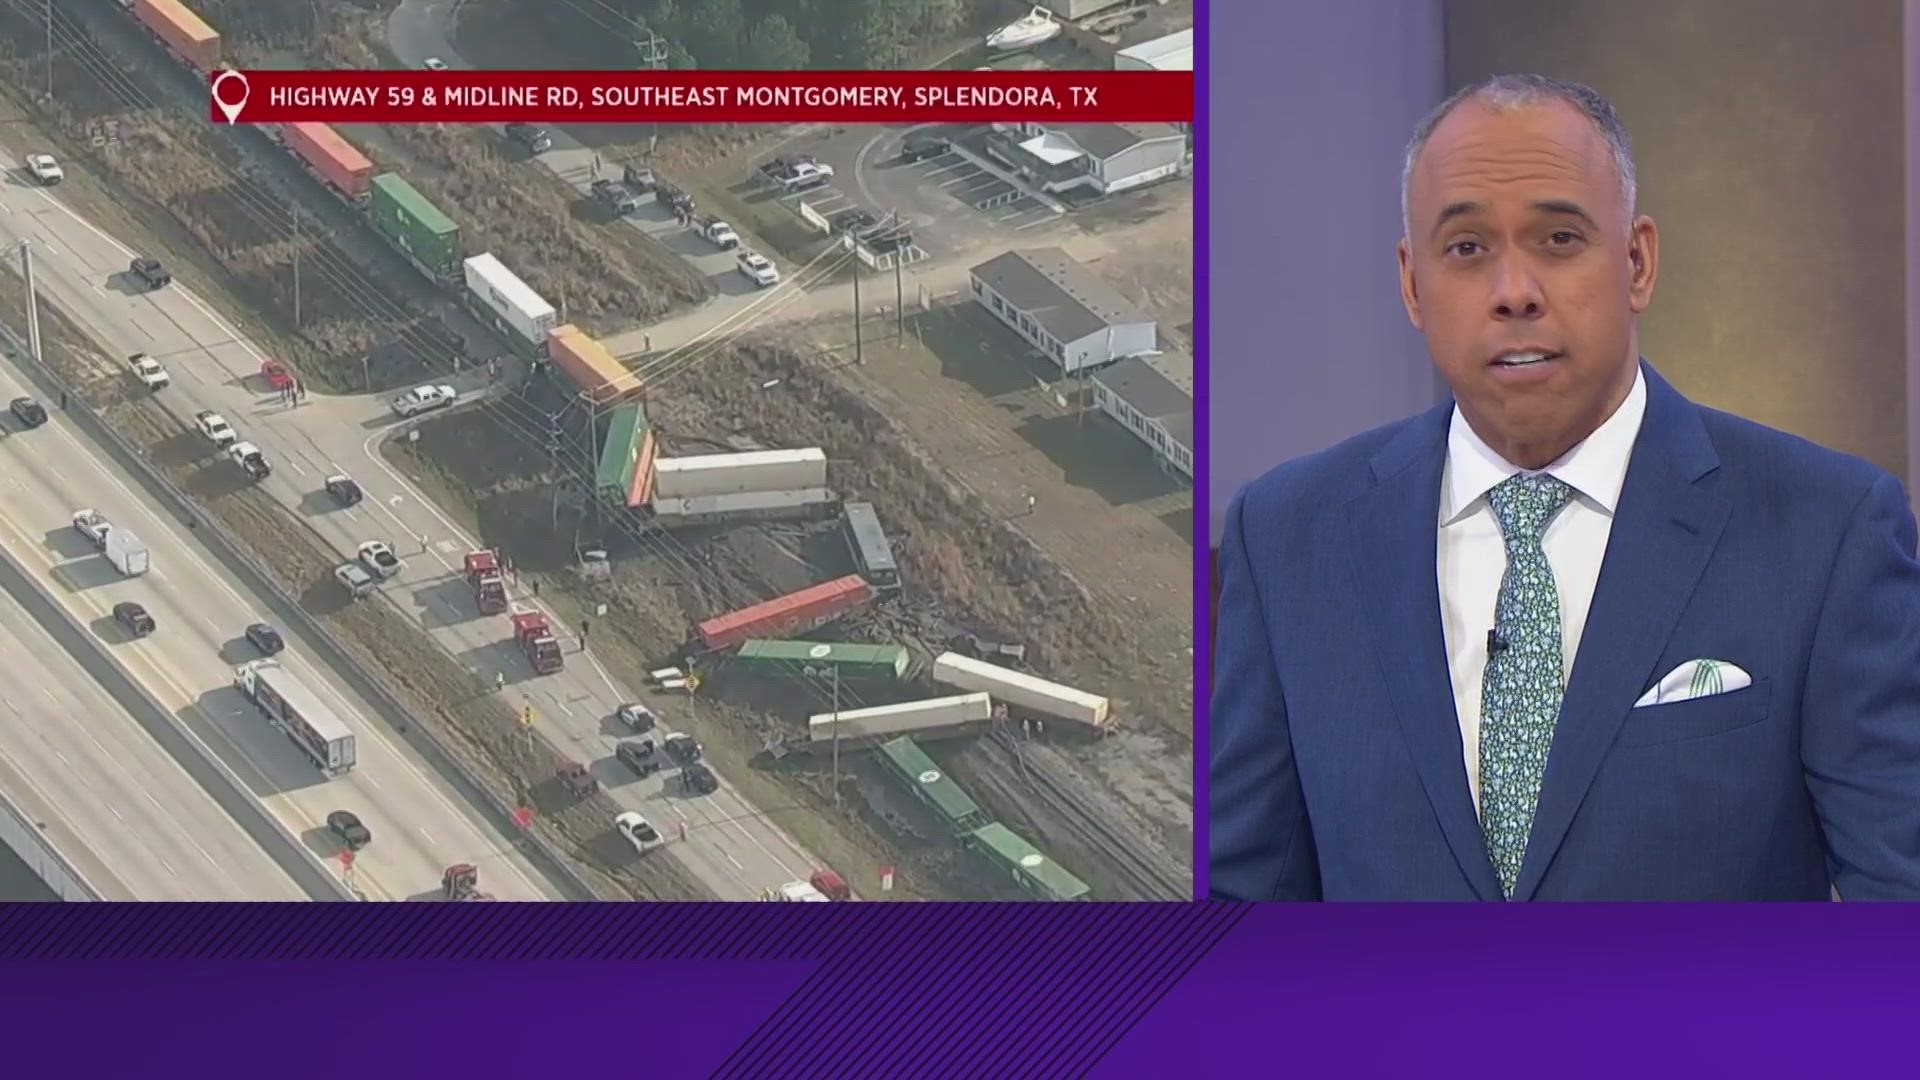 At least 15 train cars derailed in the crash.